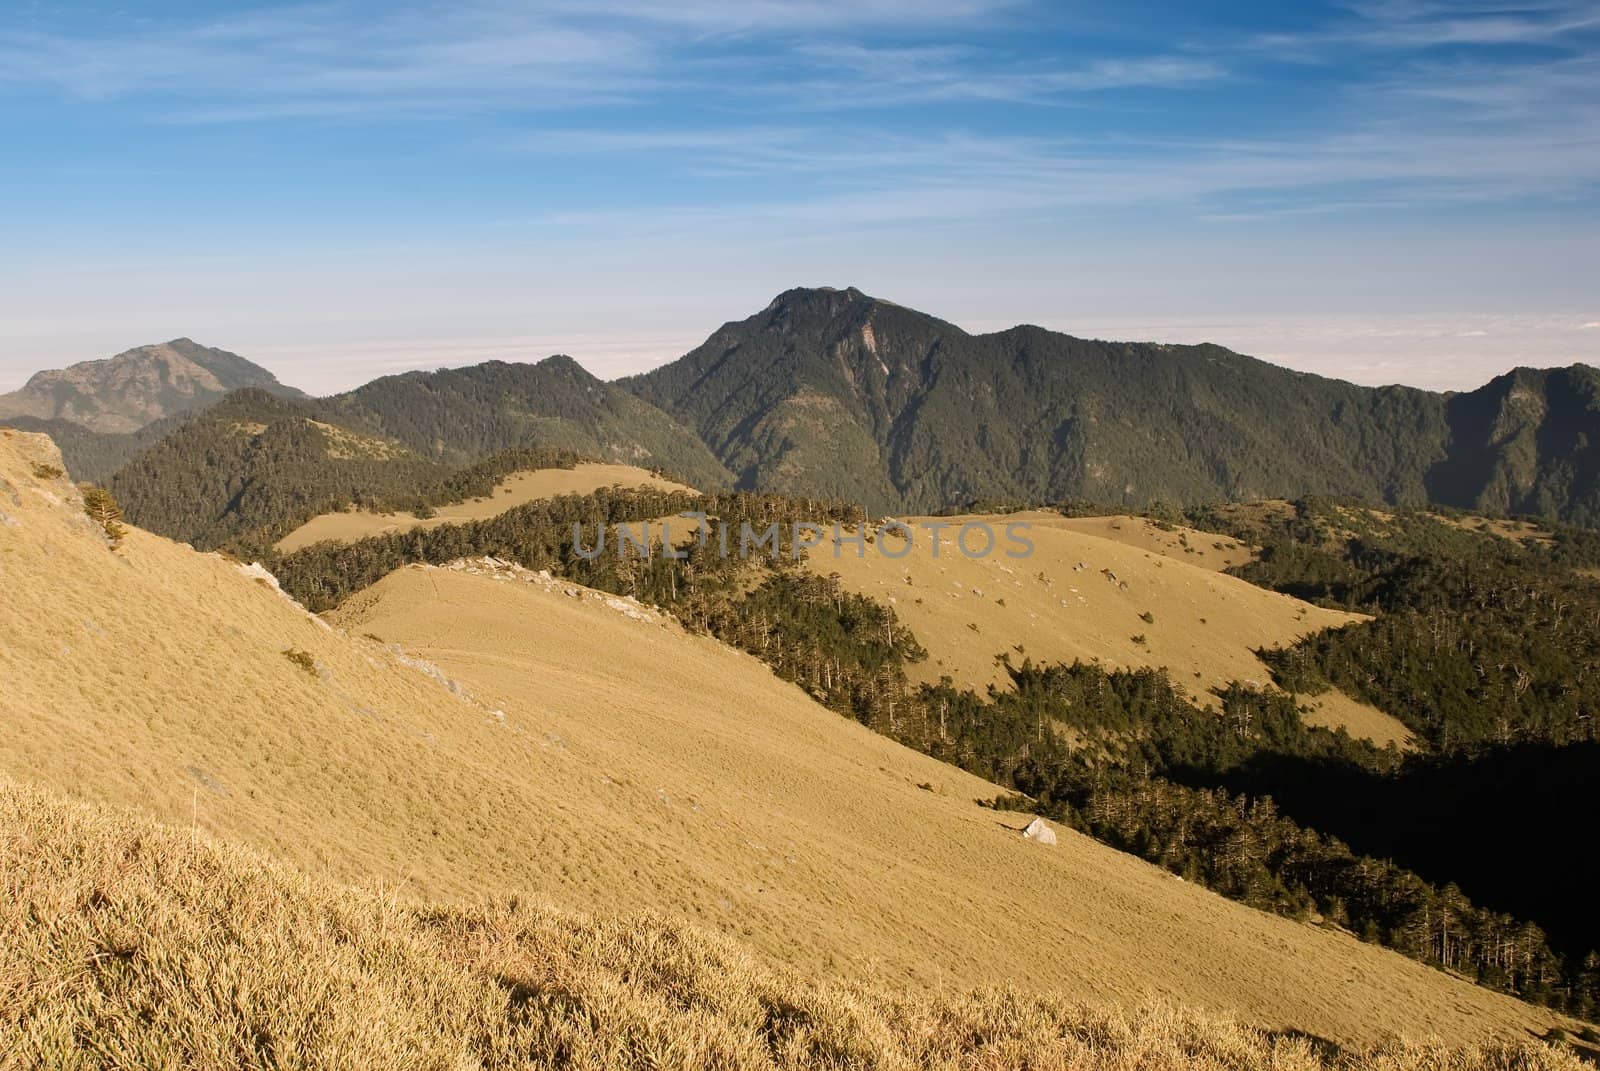 Mountain landscape with golden grassland in the morning.